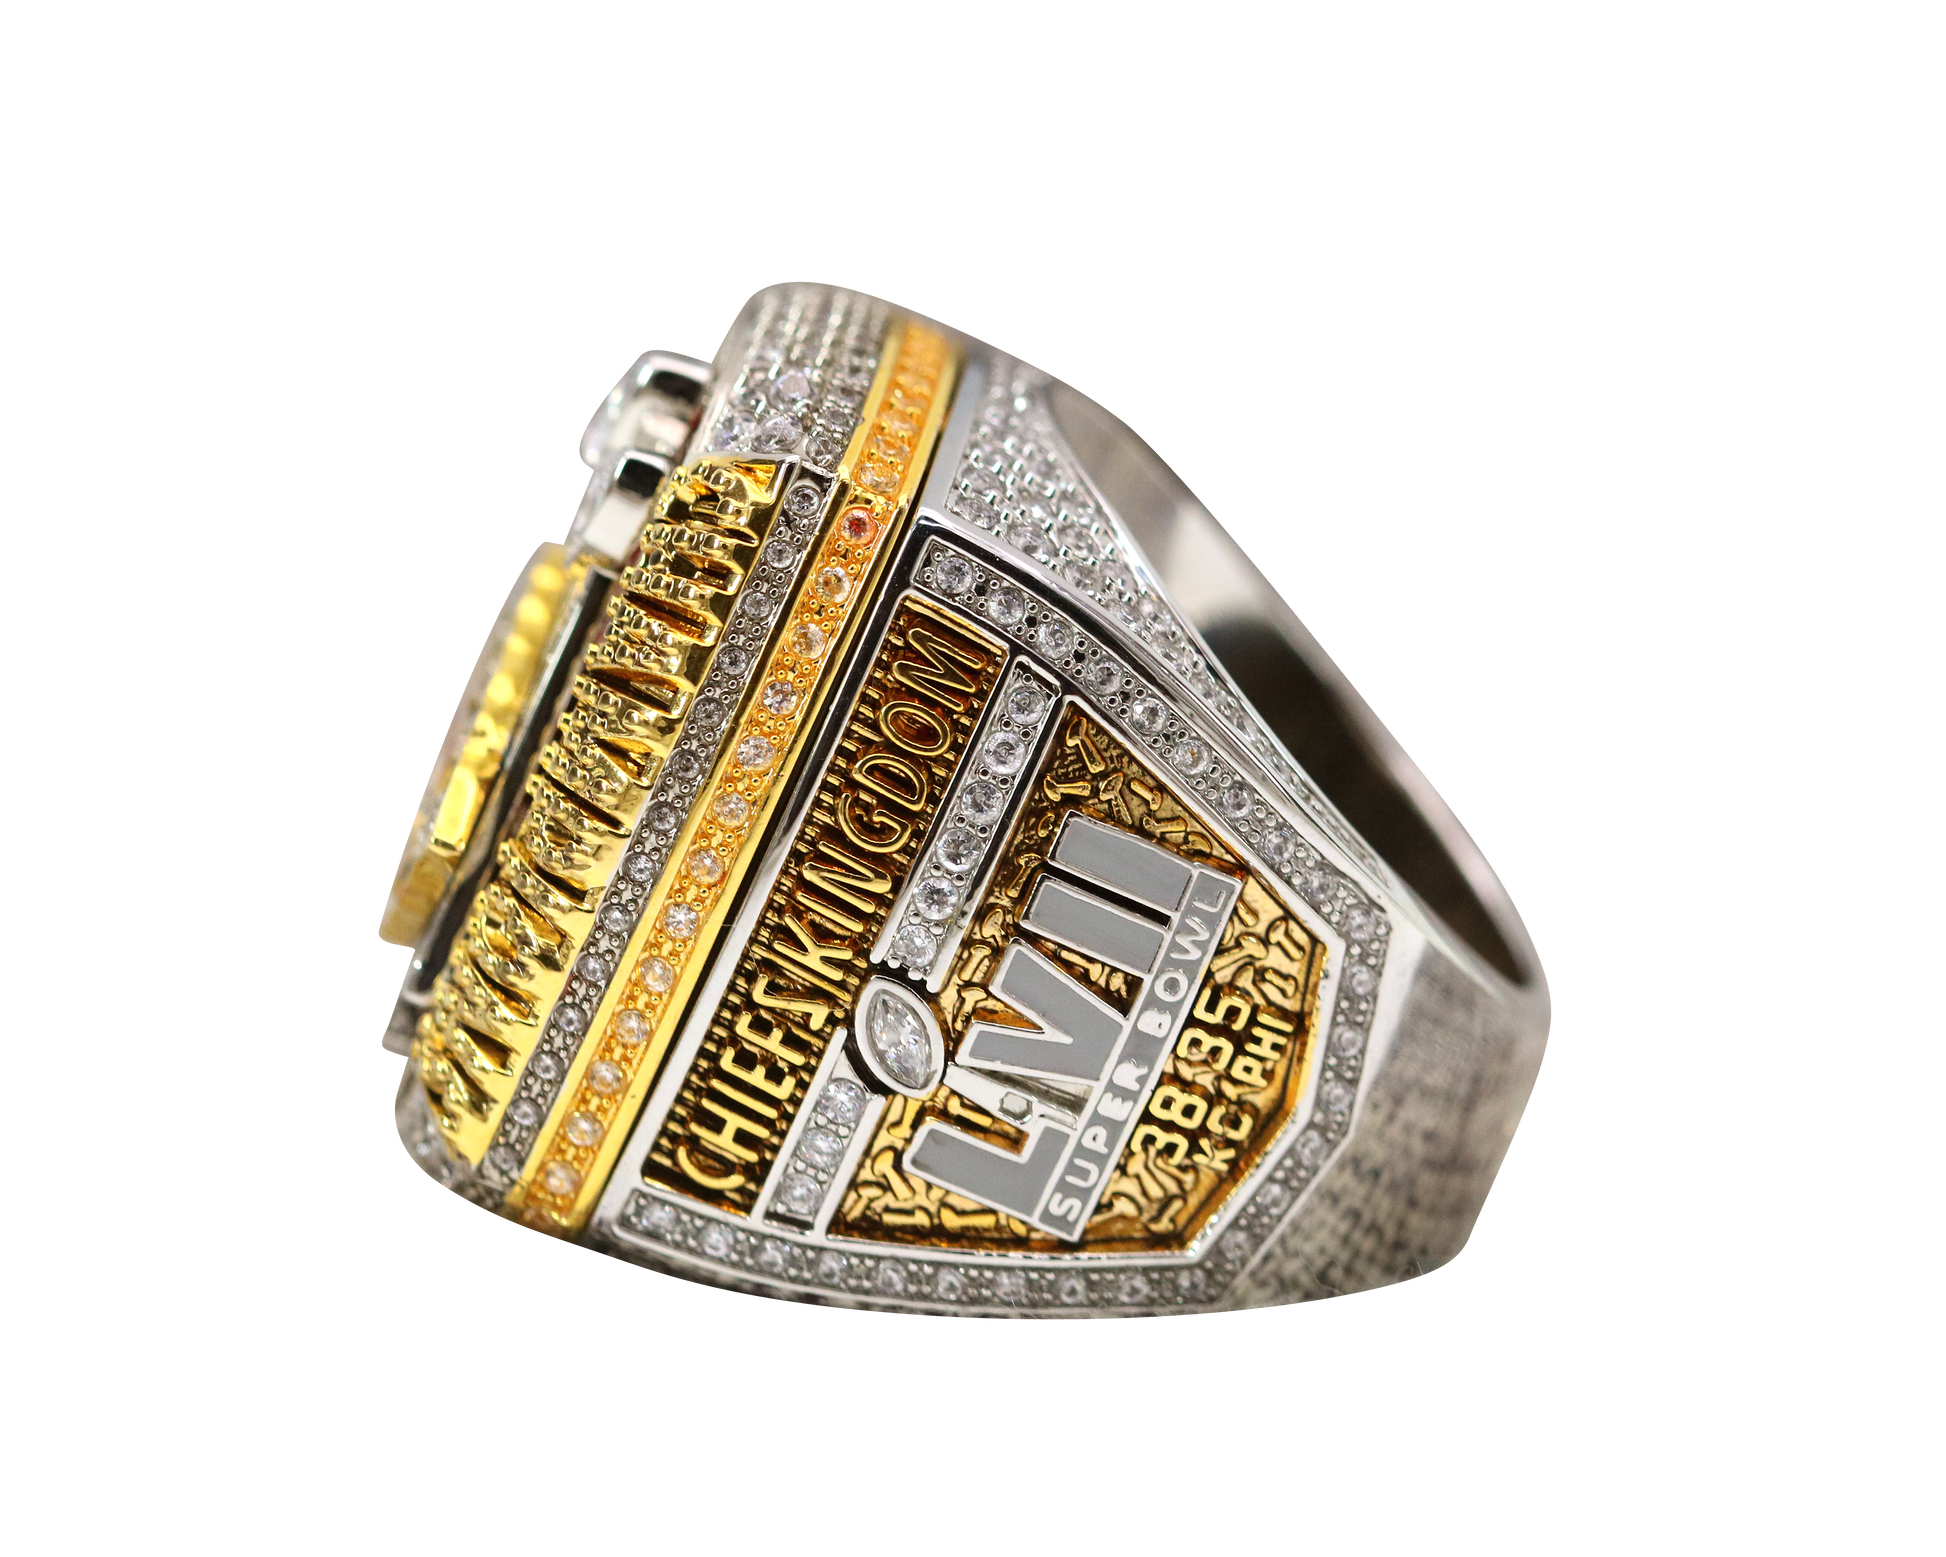 Chiefs Super Bowl LVII ring: first look at the jewelry - Arrowhead